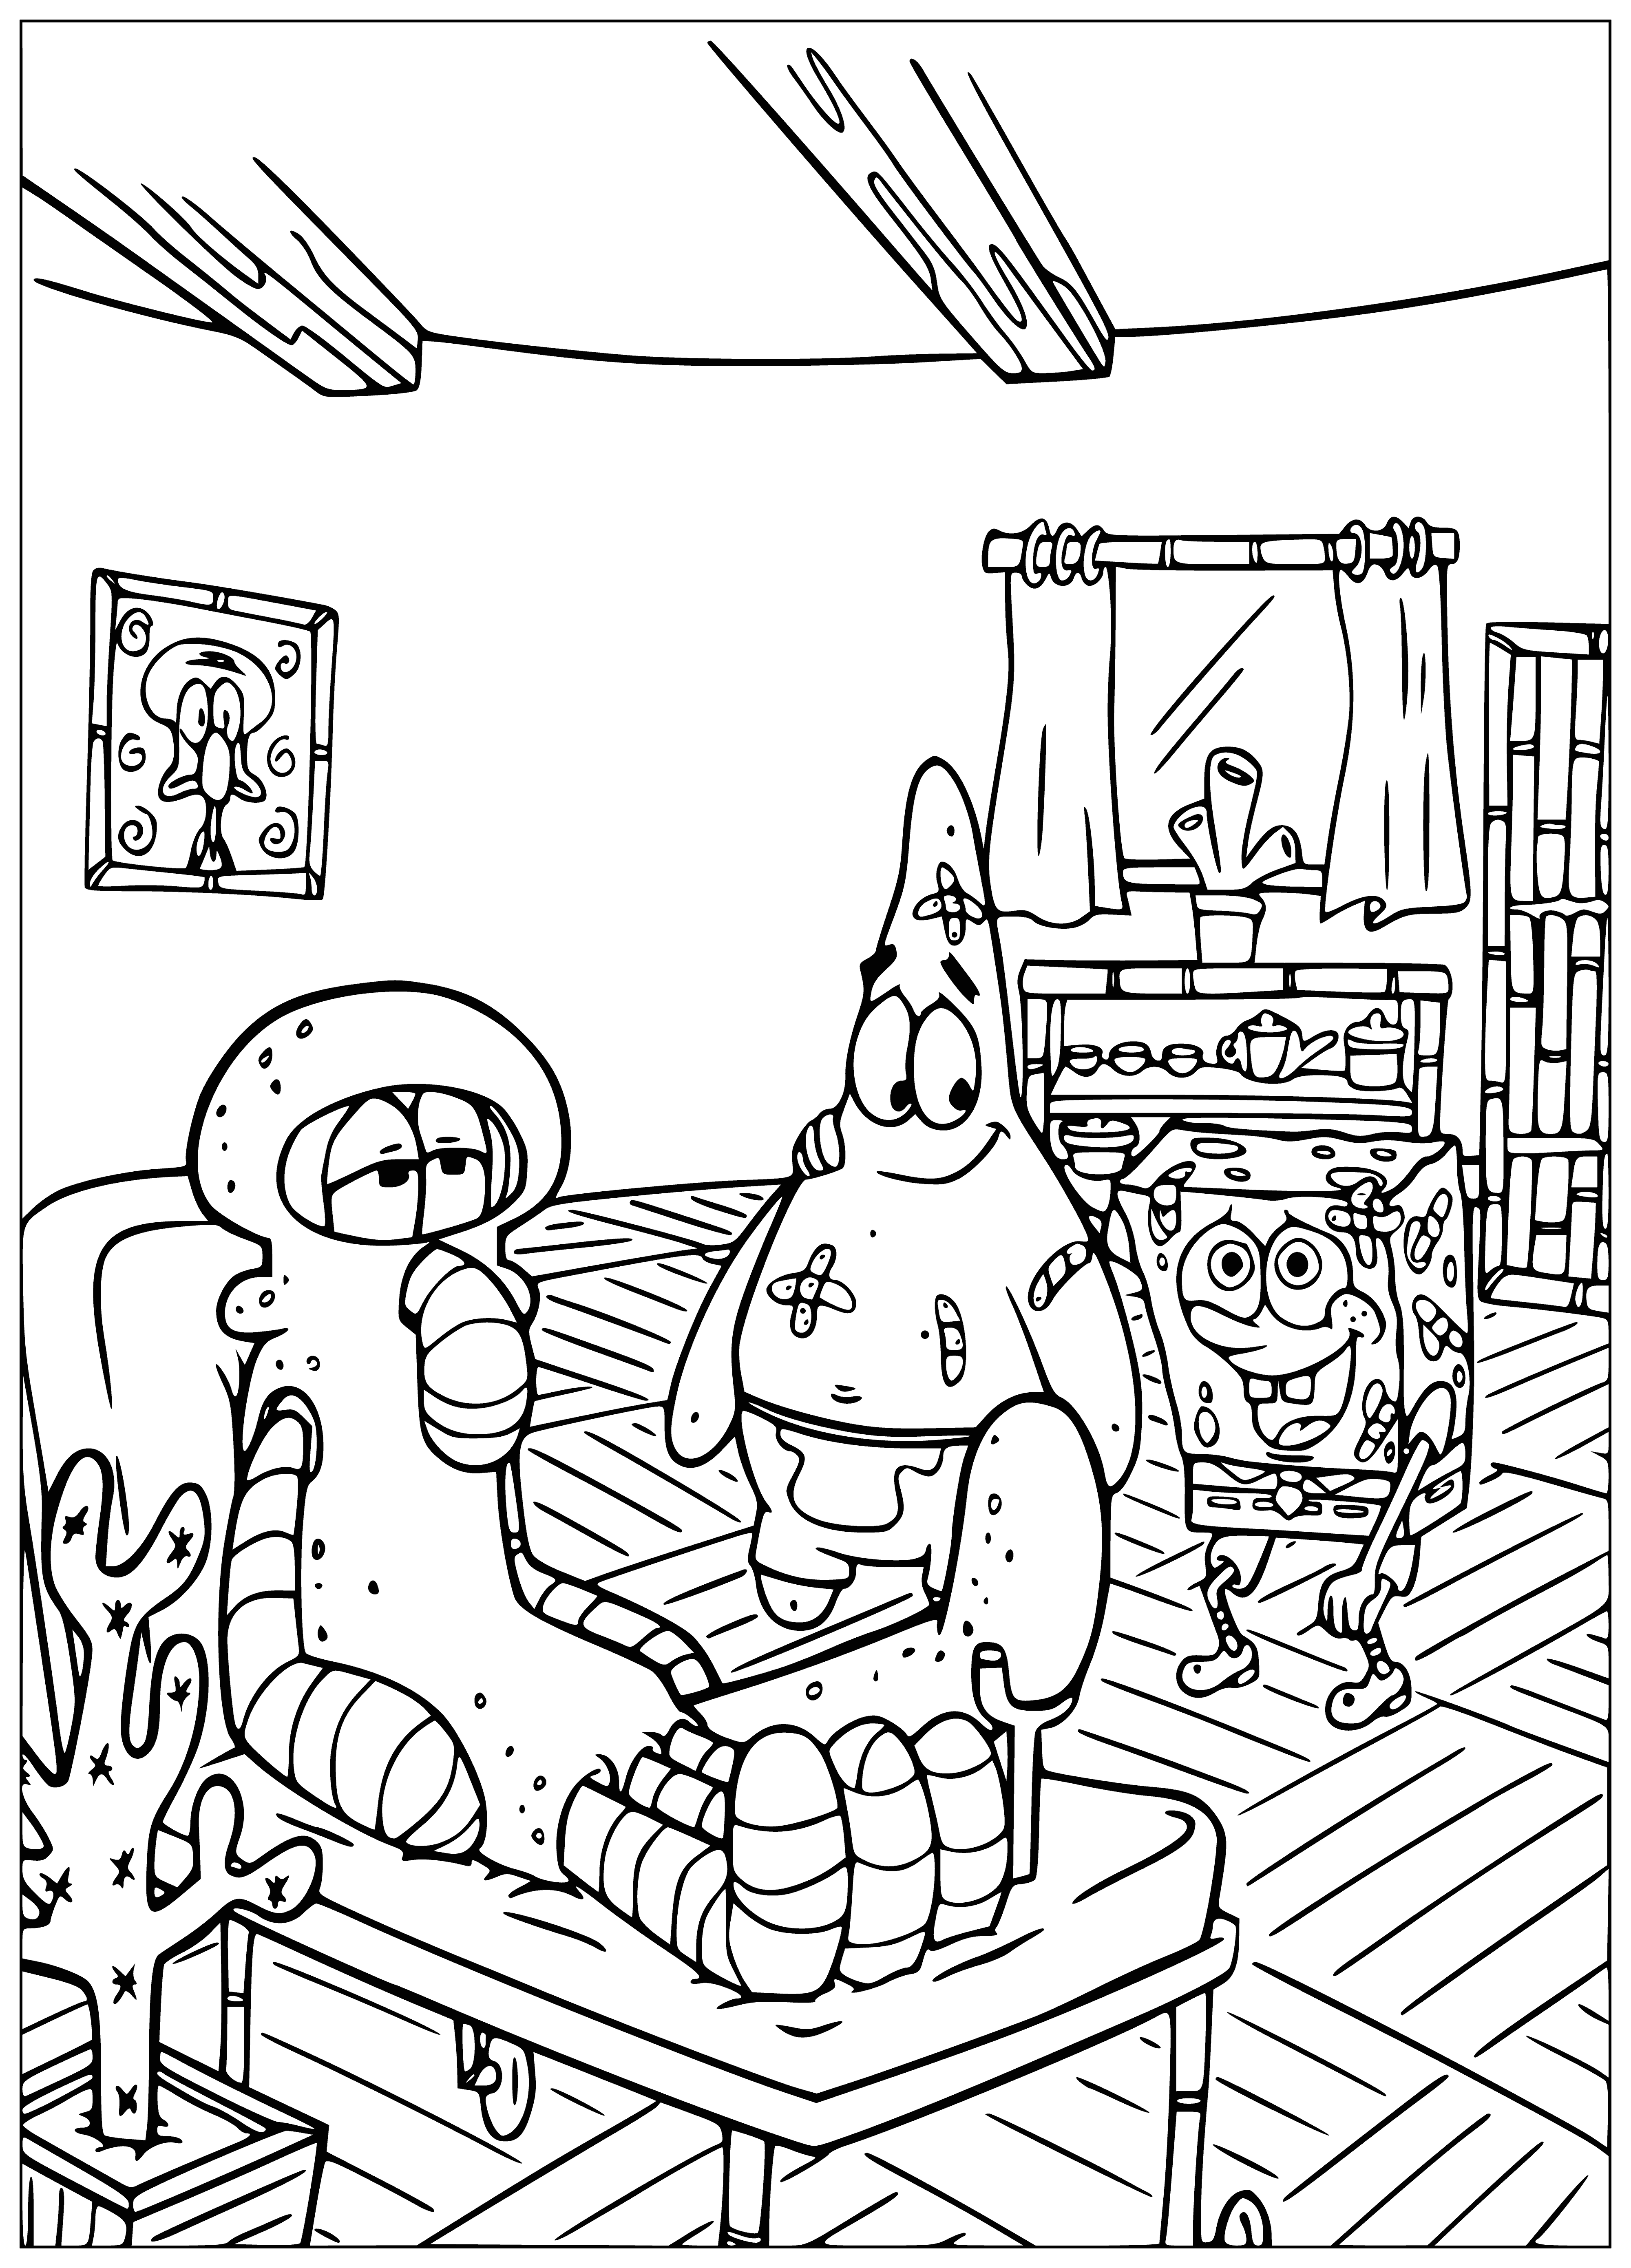 Full plaster coloring page